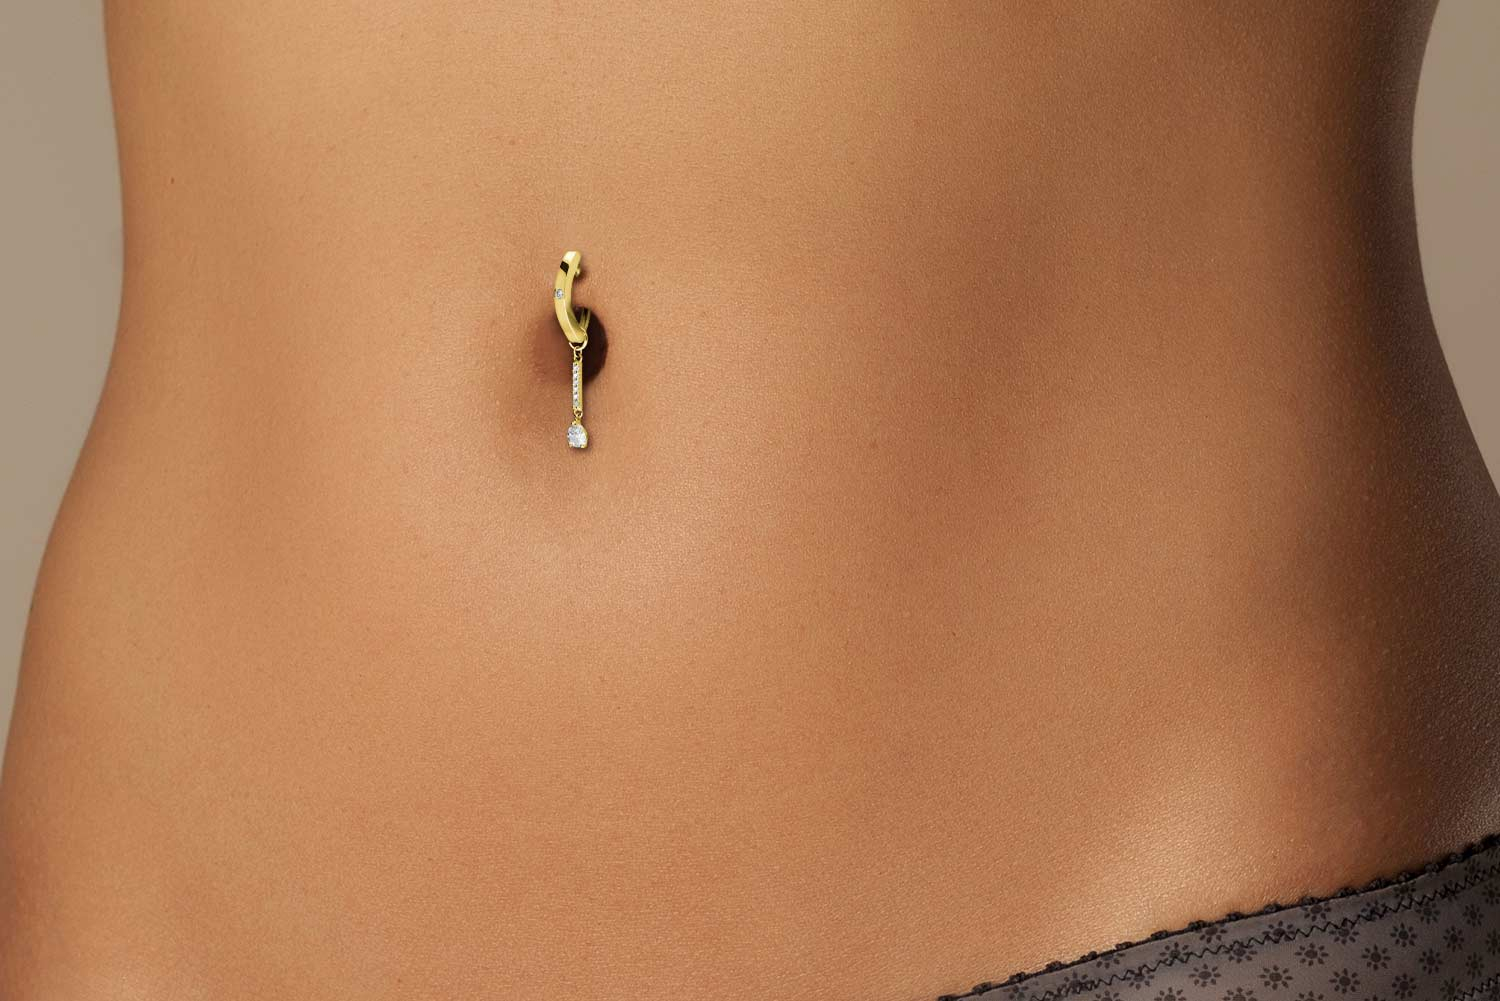 18 carat gold pendant for clickers CRYSTAL BAR + CRYSTAL